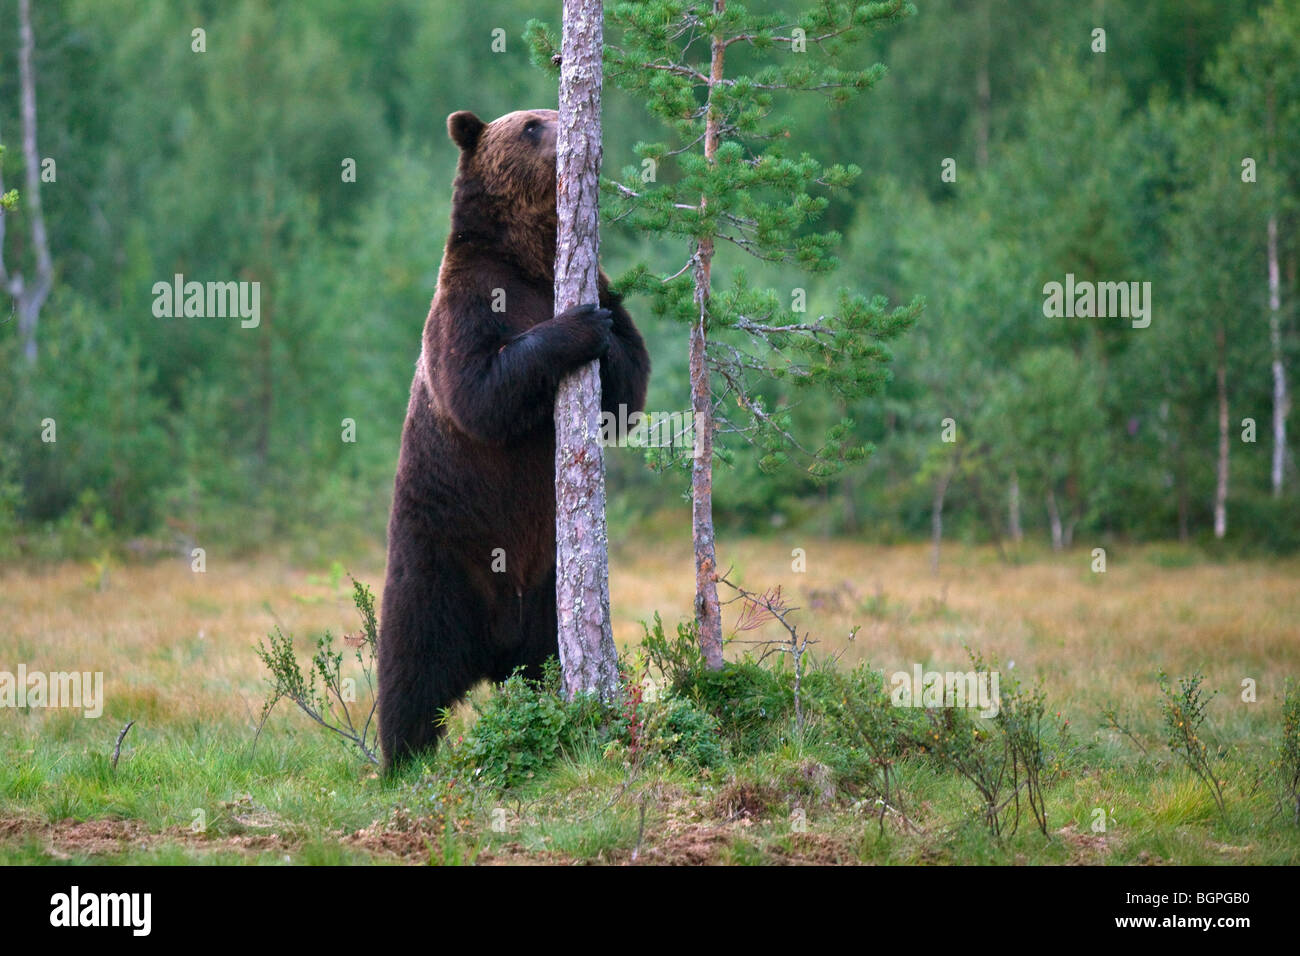 Brown bear (Ursus arctos) standing upright against tree in the taiga, Karelien, Finland Stock Photo